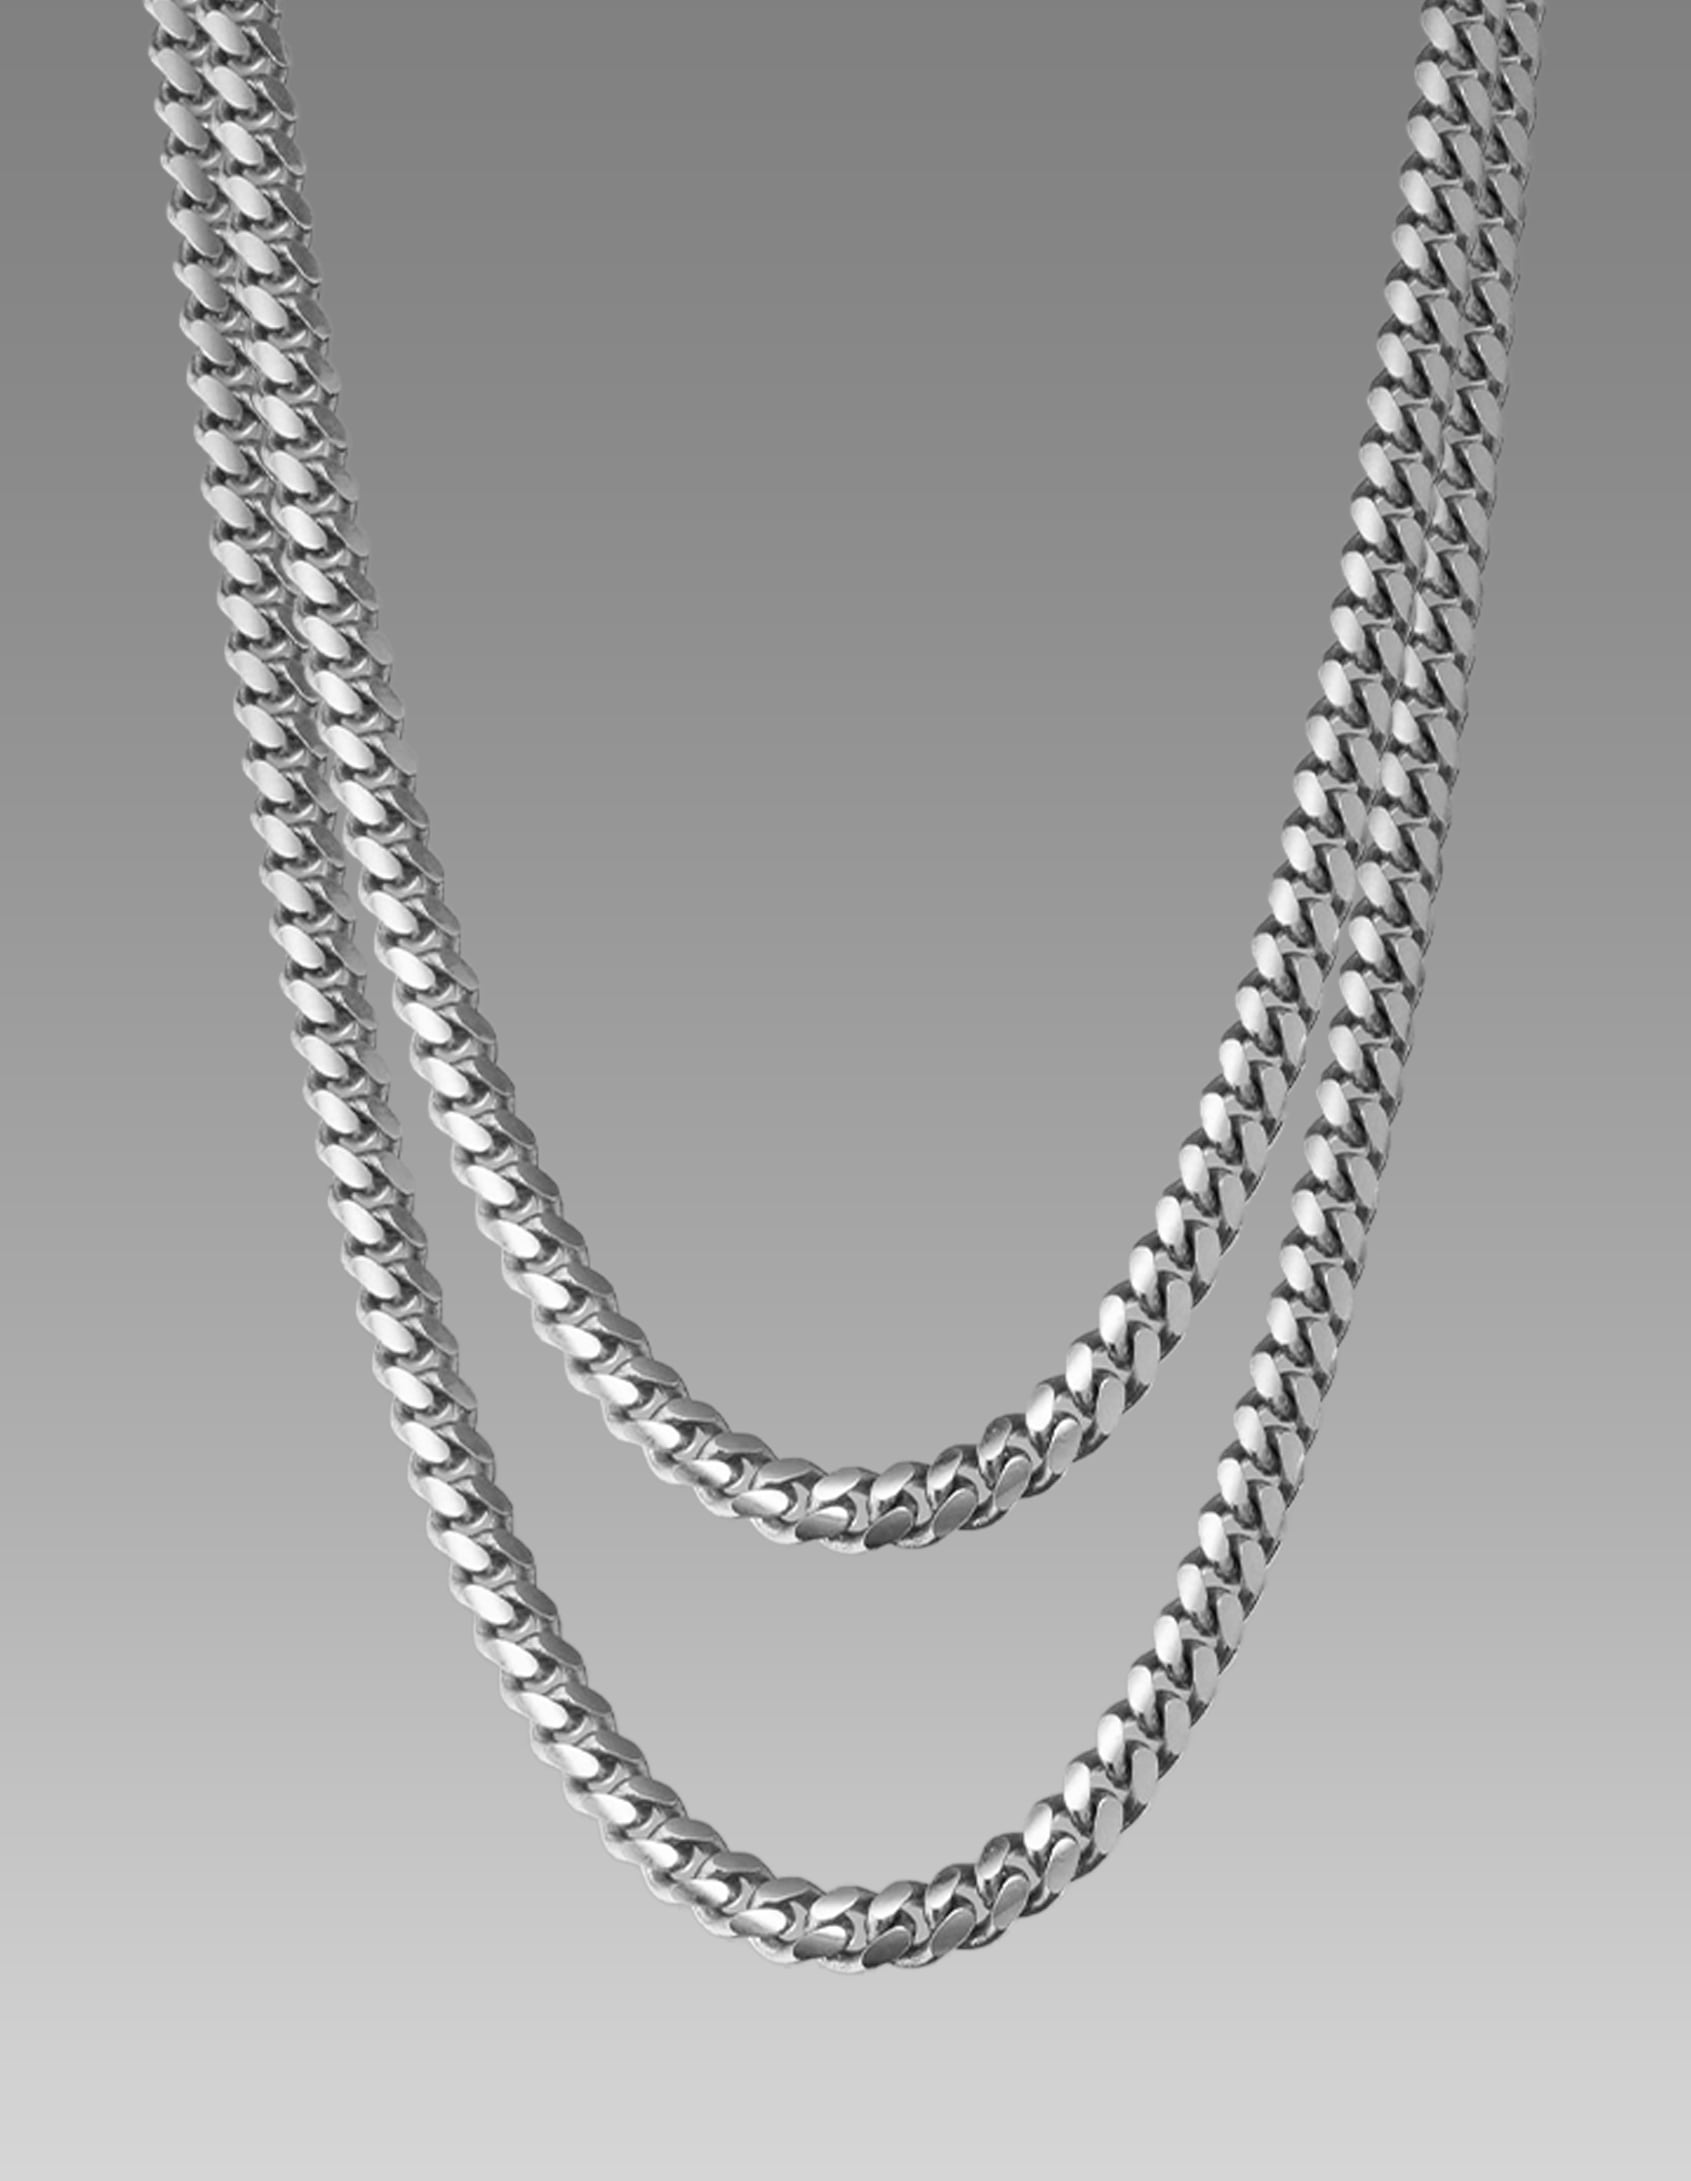 Image Cuban Chain Stack - 3mm - Silver - Made with Precious Metals